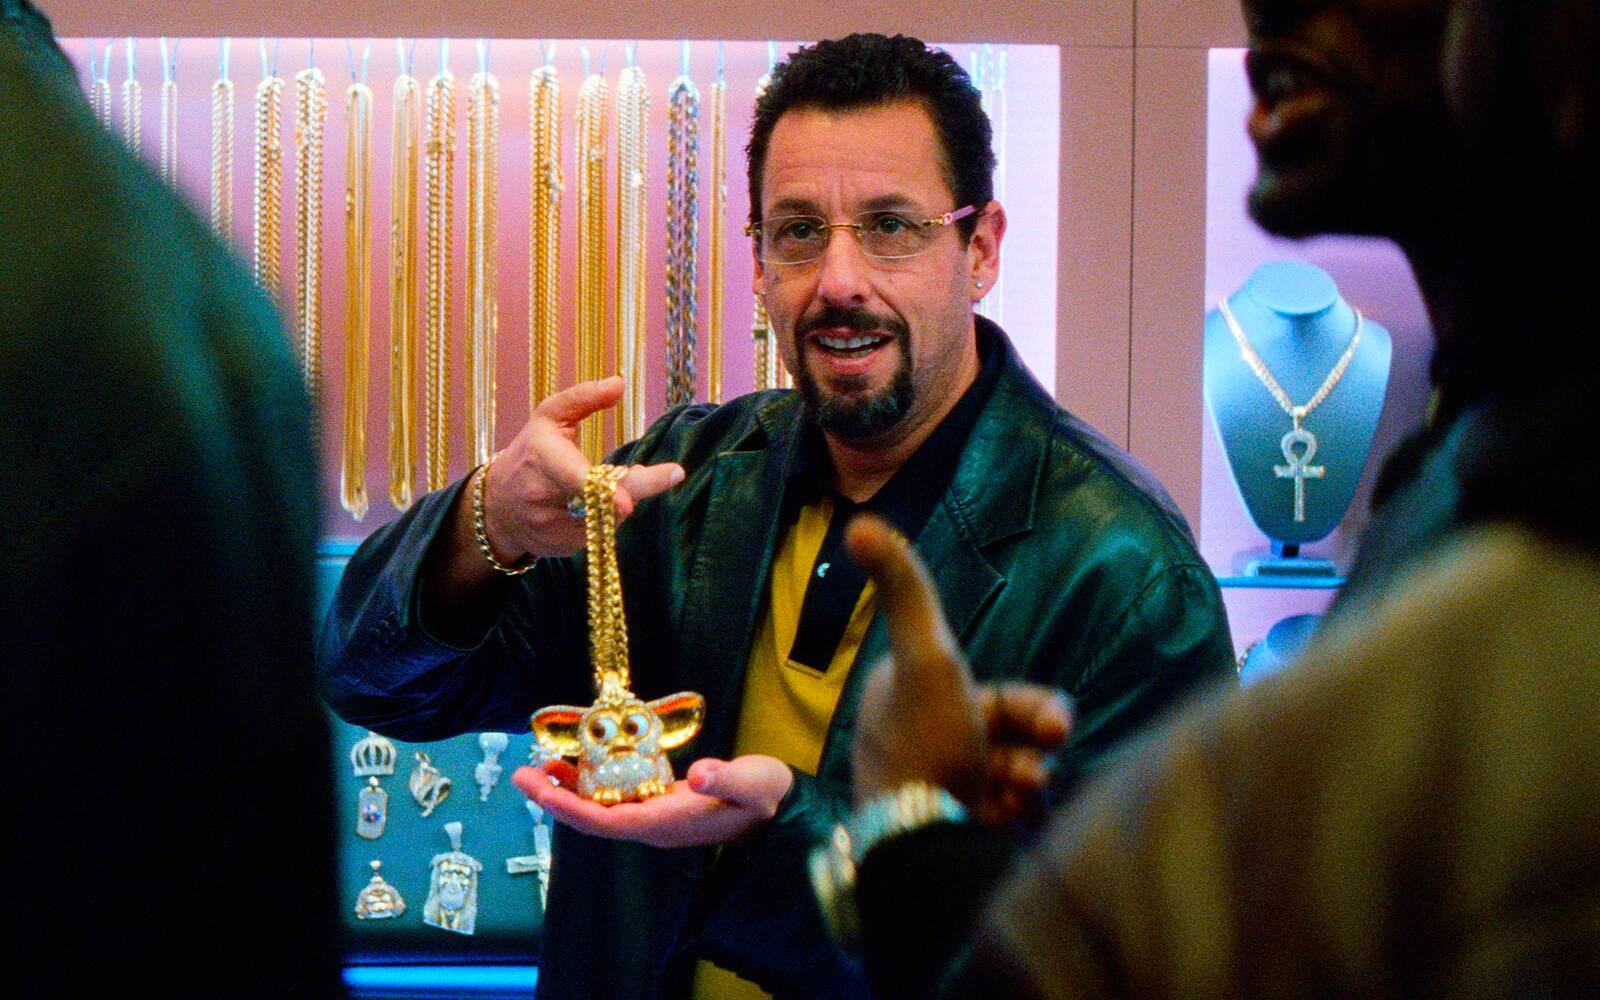 A man holding up a gold chain with a diamond encrusted Furby on it.